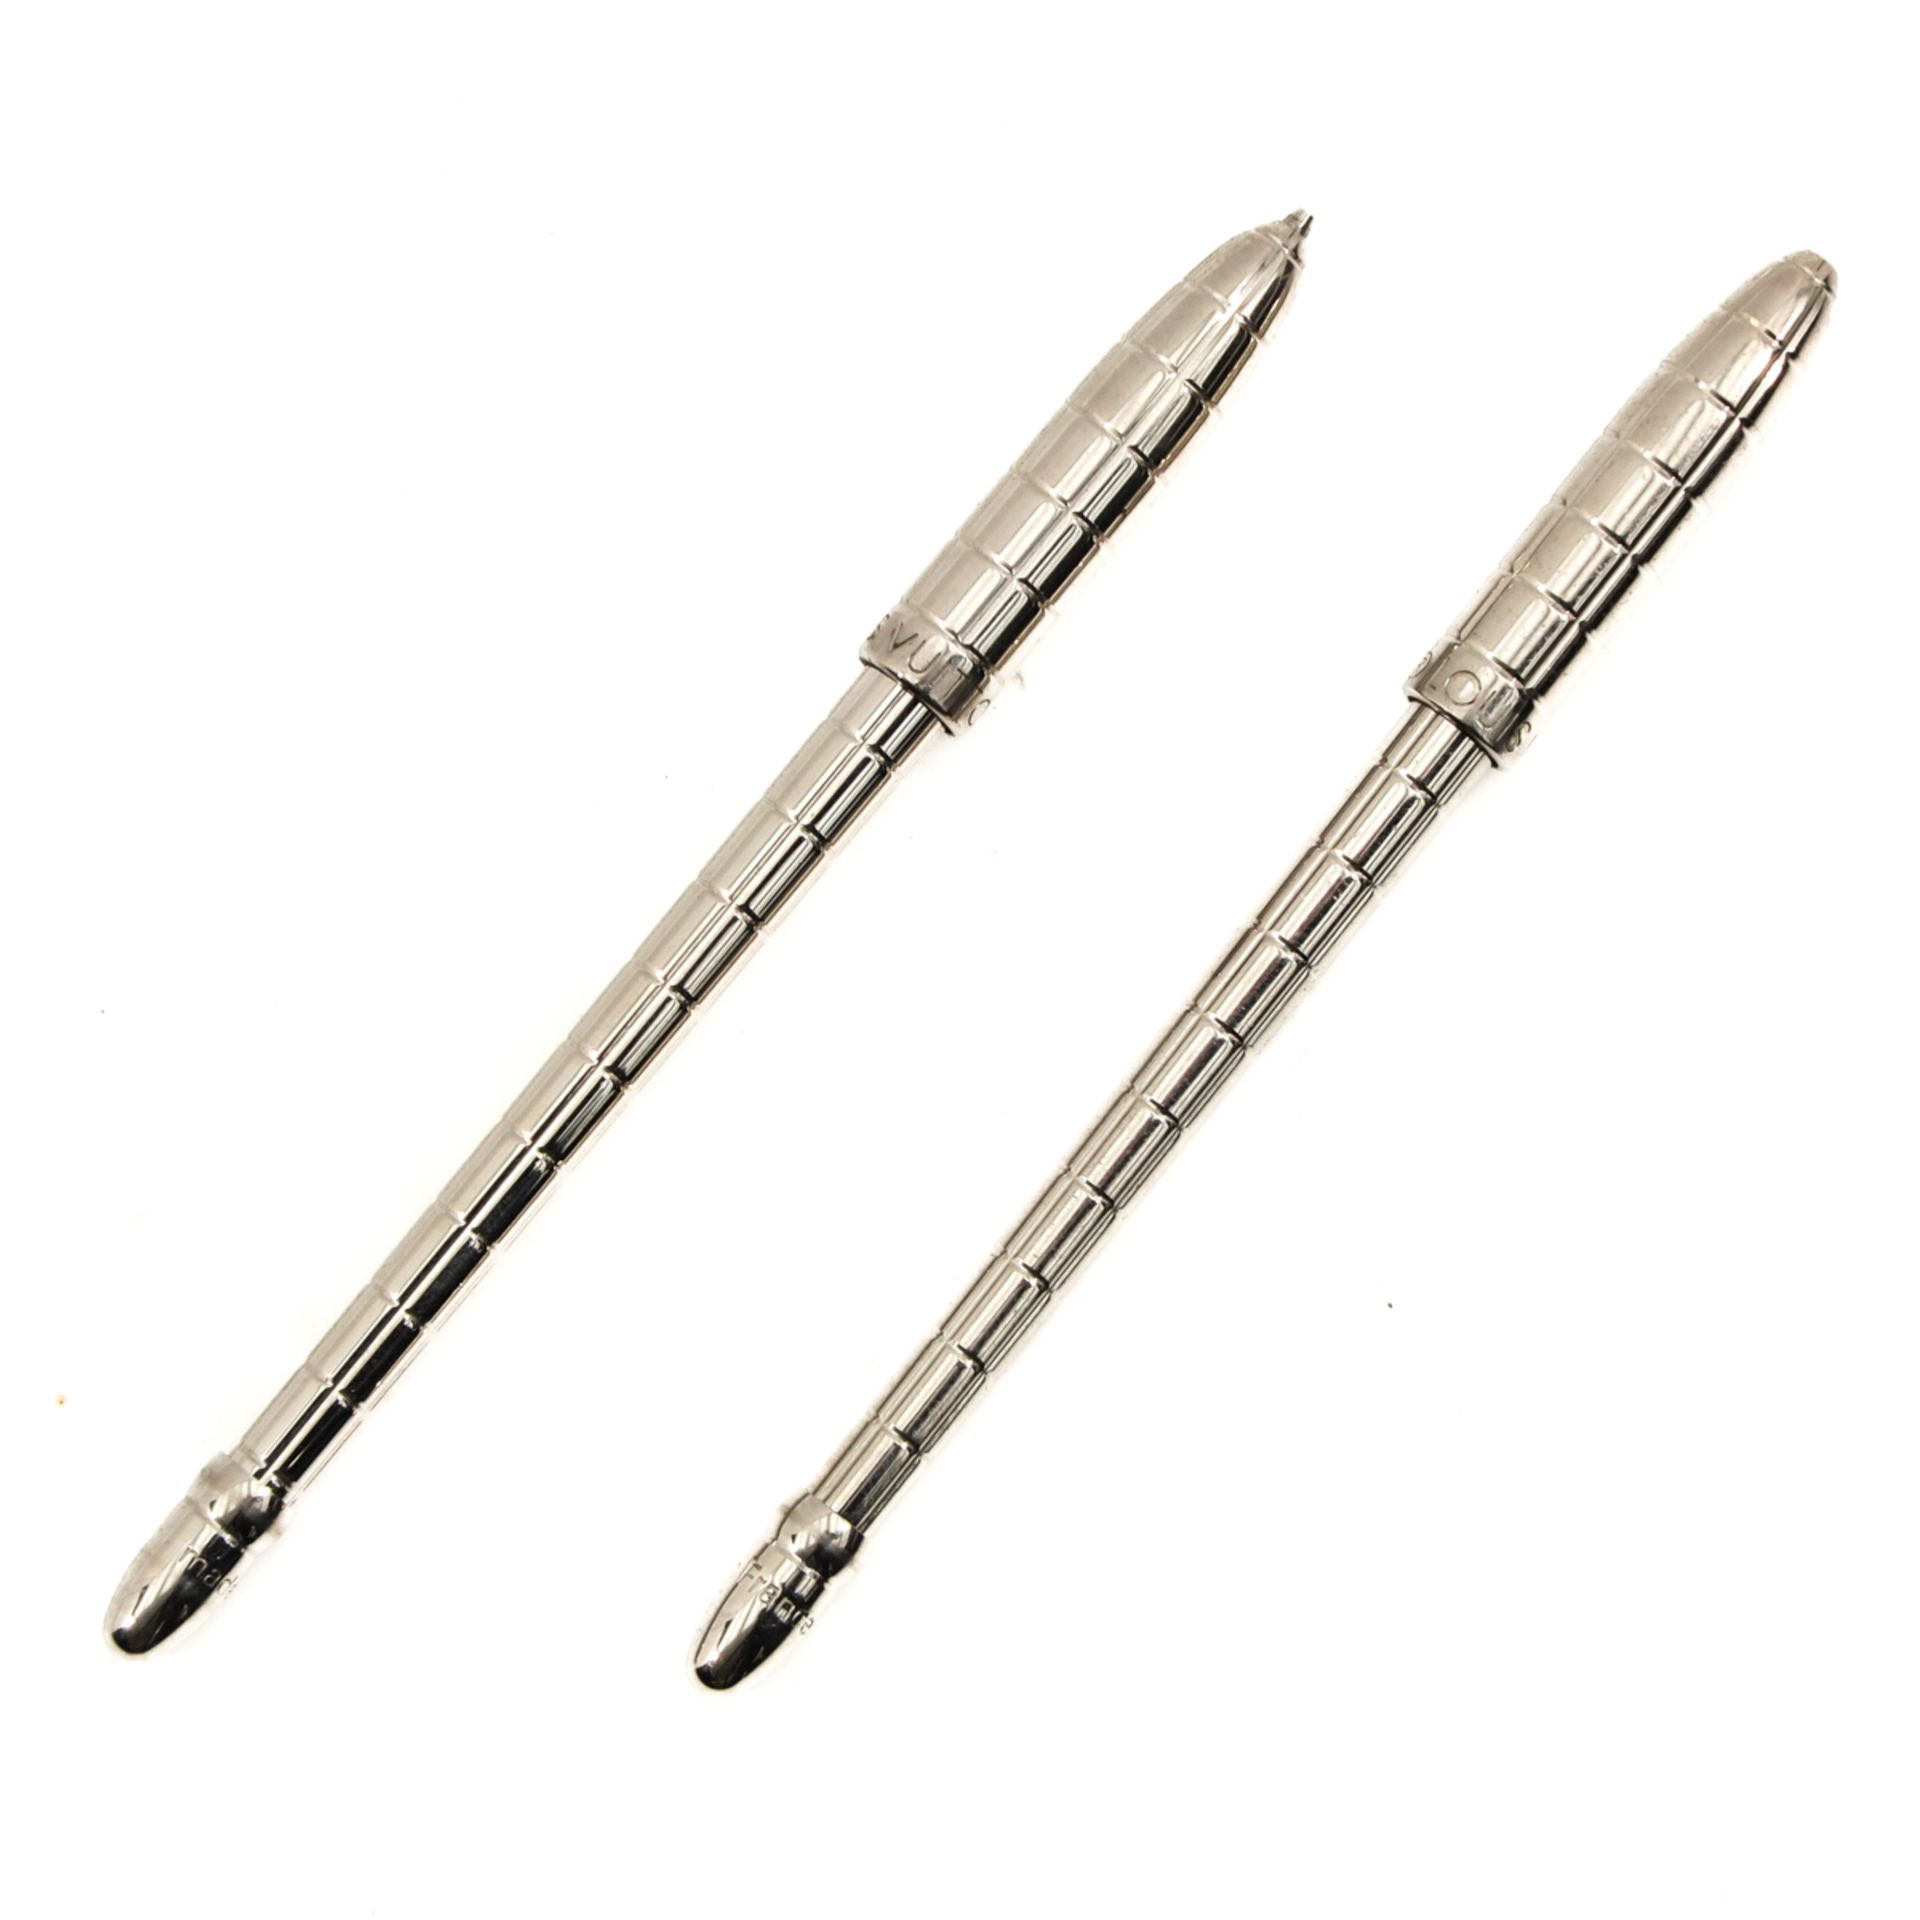 A Collection of 4 Louis Vuitton Pens - Image 5 of 6